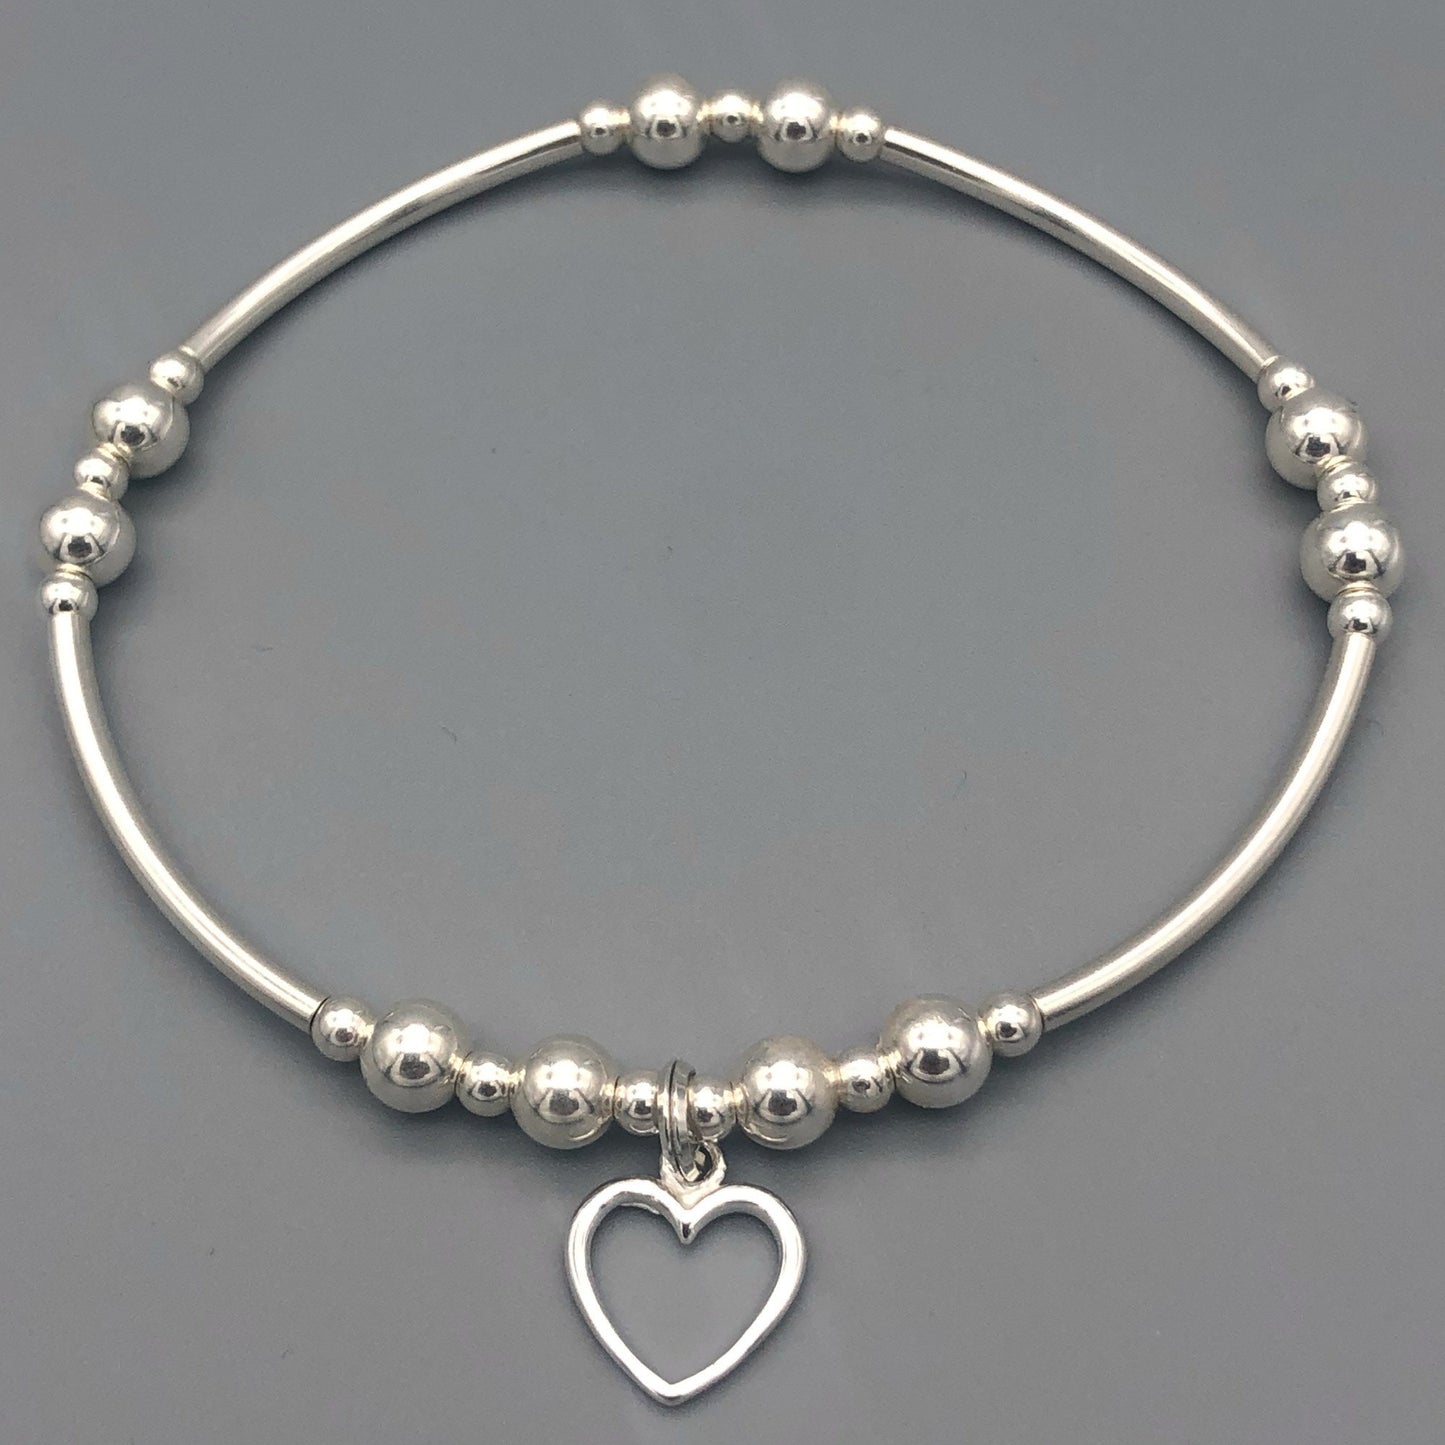 Delicate open heart charm sterling silver hand-made women's stacking bracelet by My Silver Wish